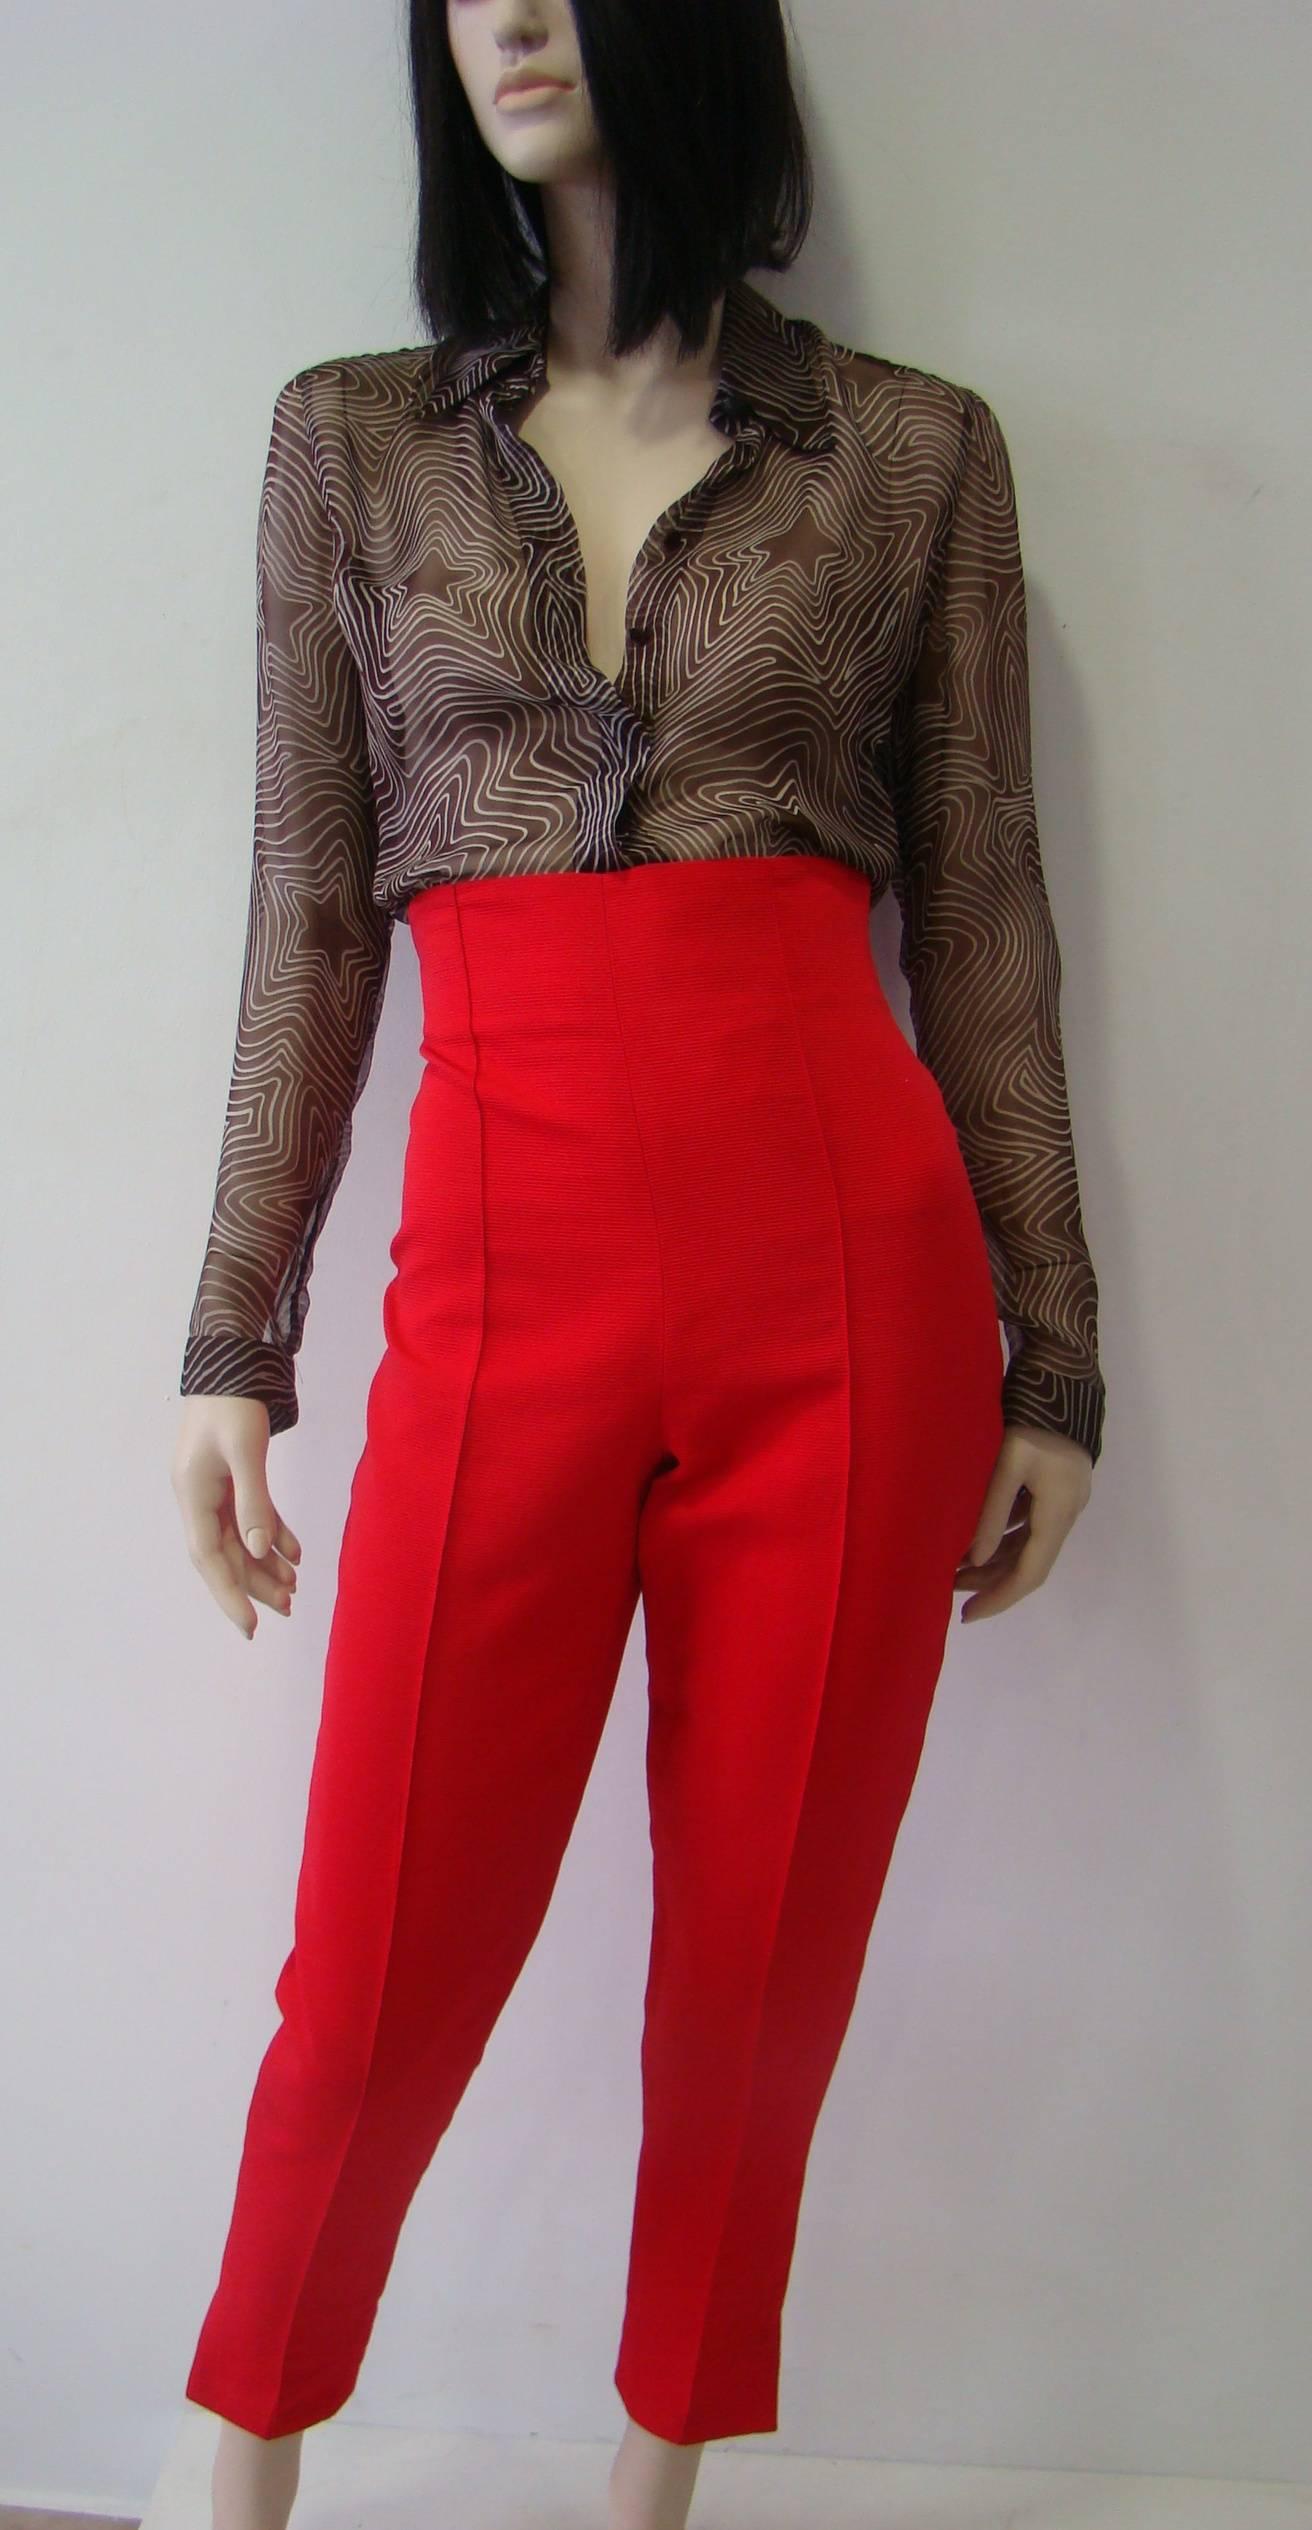 Opt For These Gianni Versace Ribbed Trousers As A Smart Complementary Feature Of Any Outfit. Beautiful Red Pants, Featuring A High Waist And Back Zip Fastening. 100%Cotton, Slim Fit But Not Strechy And Leg Length. Try Teaming With A Lace Or Sheer